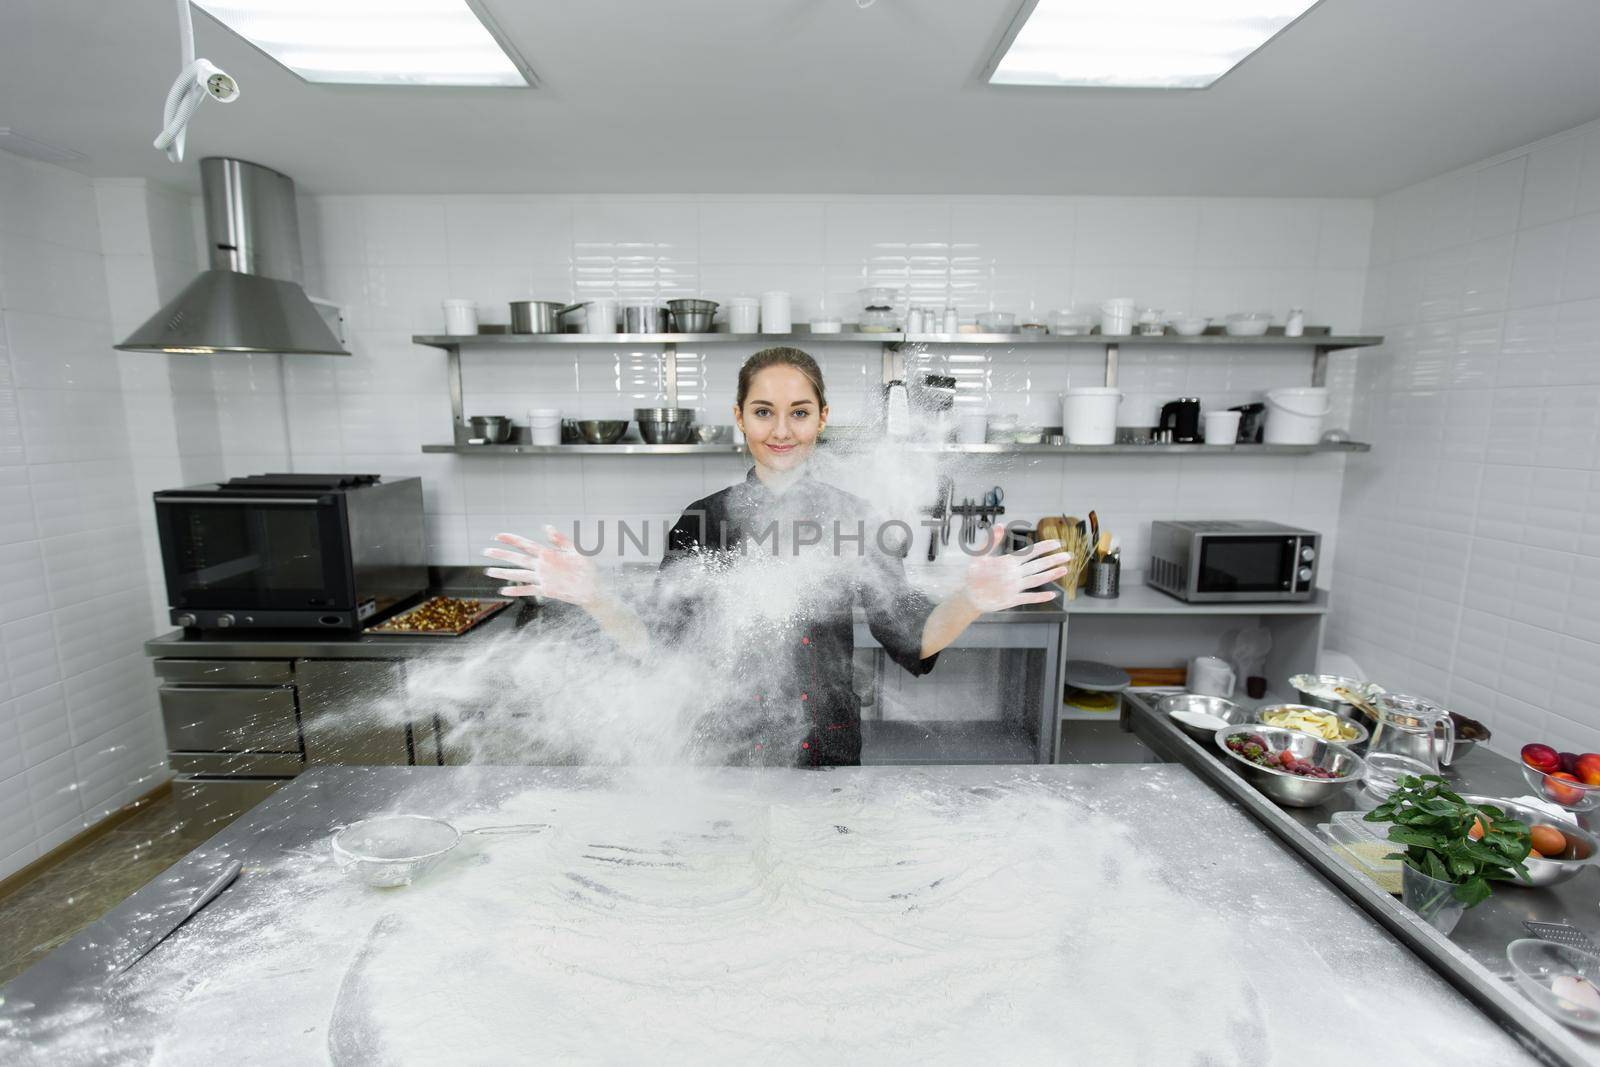 The pastry chef claps his hands and the flour is scattered all over the kitchen.